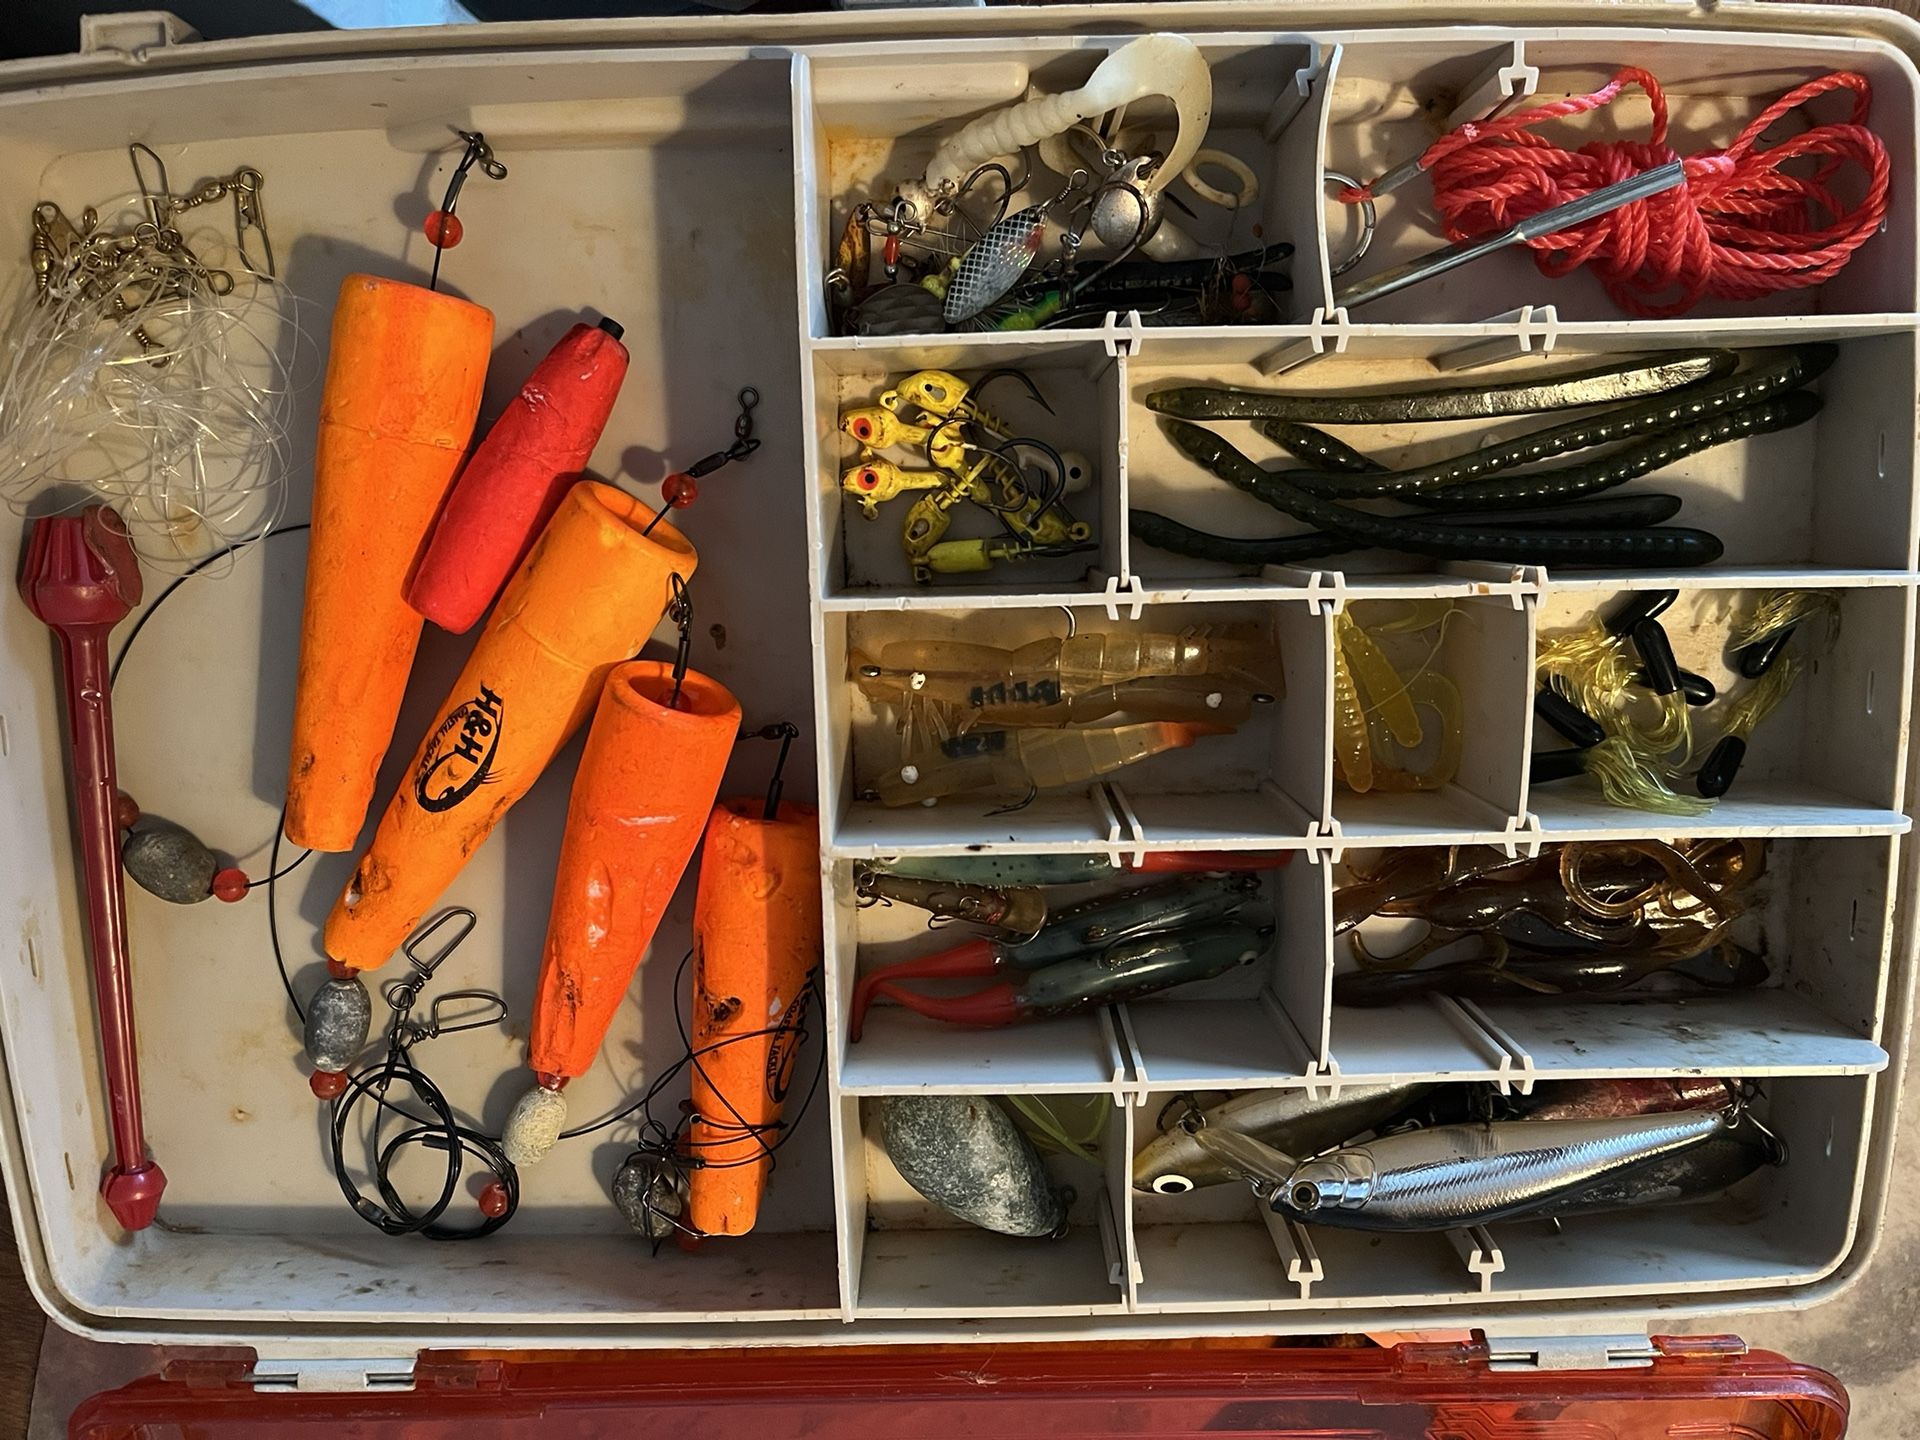 Tackle Box With Fishing Accessories